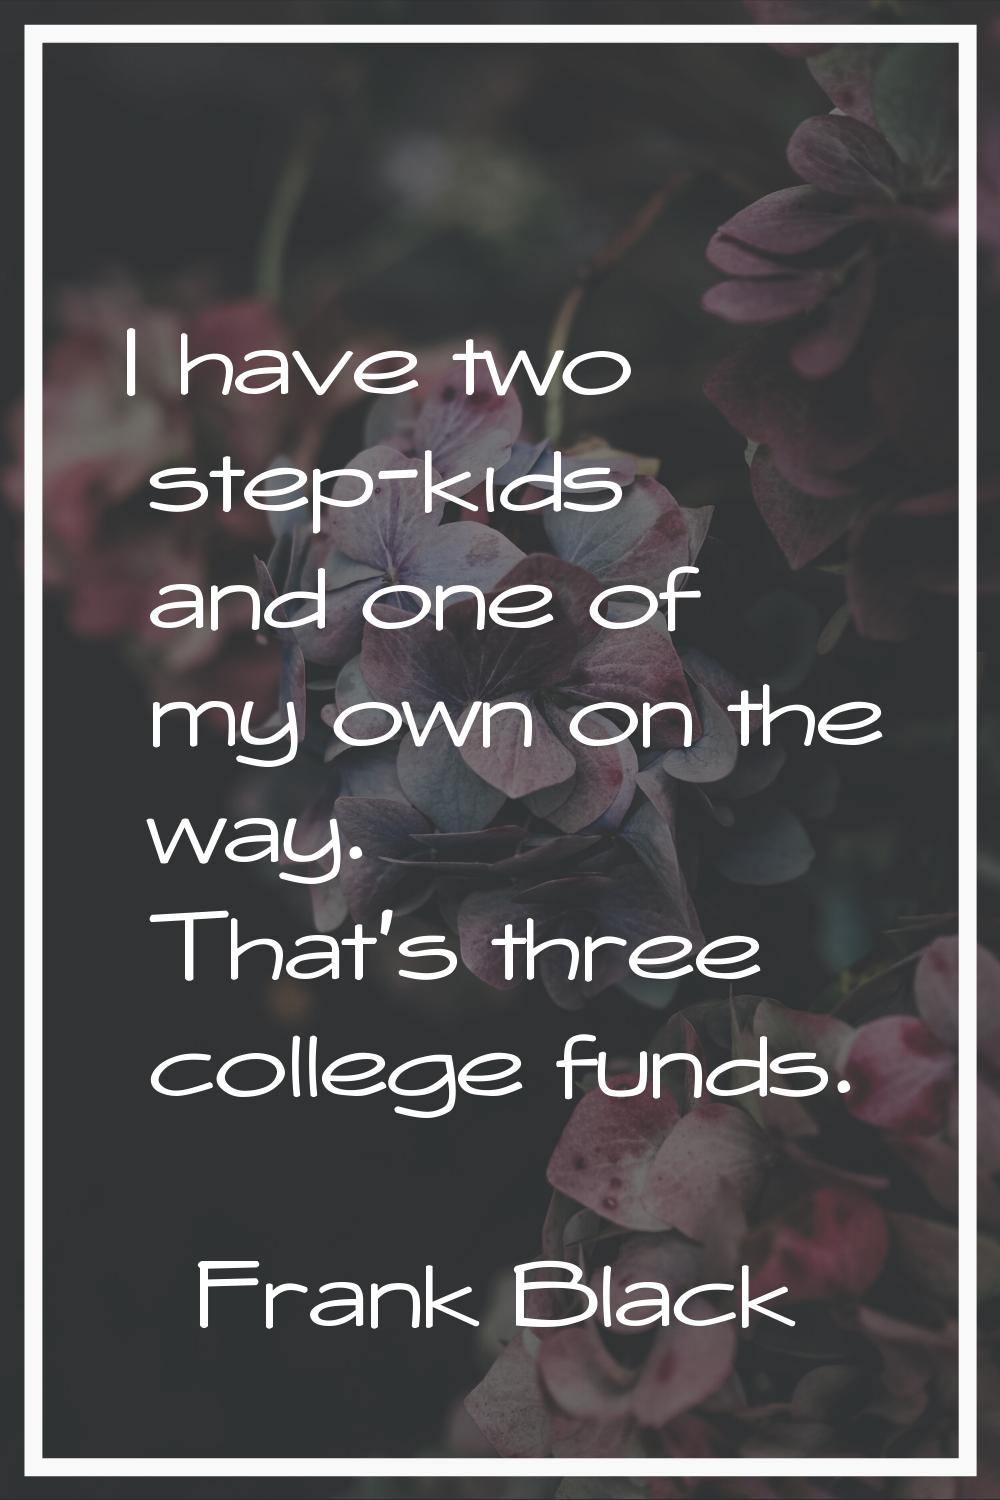 I have two step-kids and one of my own on the way. That's three college funds.